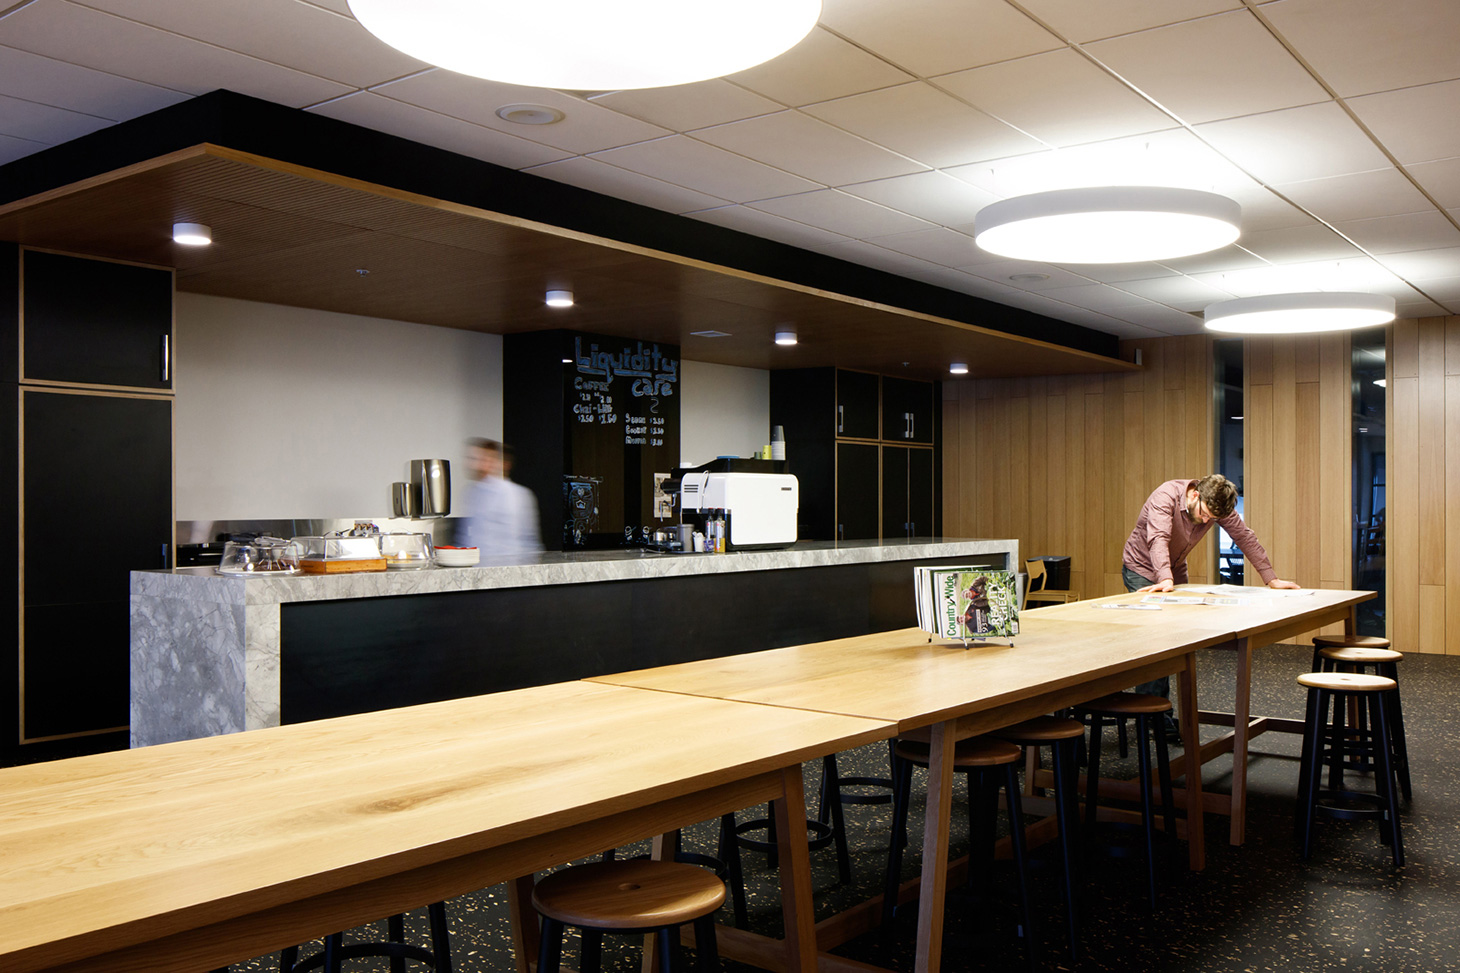 NZX Kitchen/Cafe Space. Wellington architect